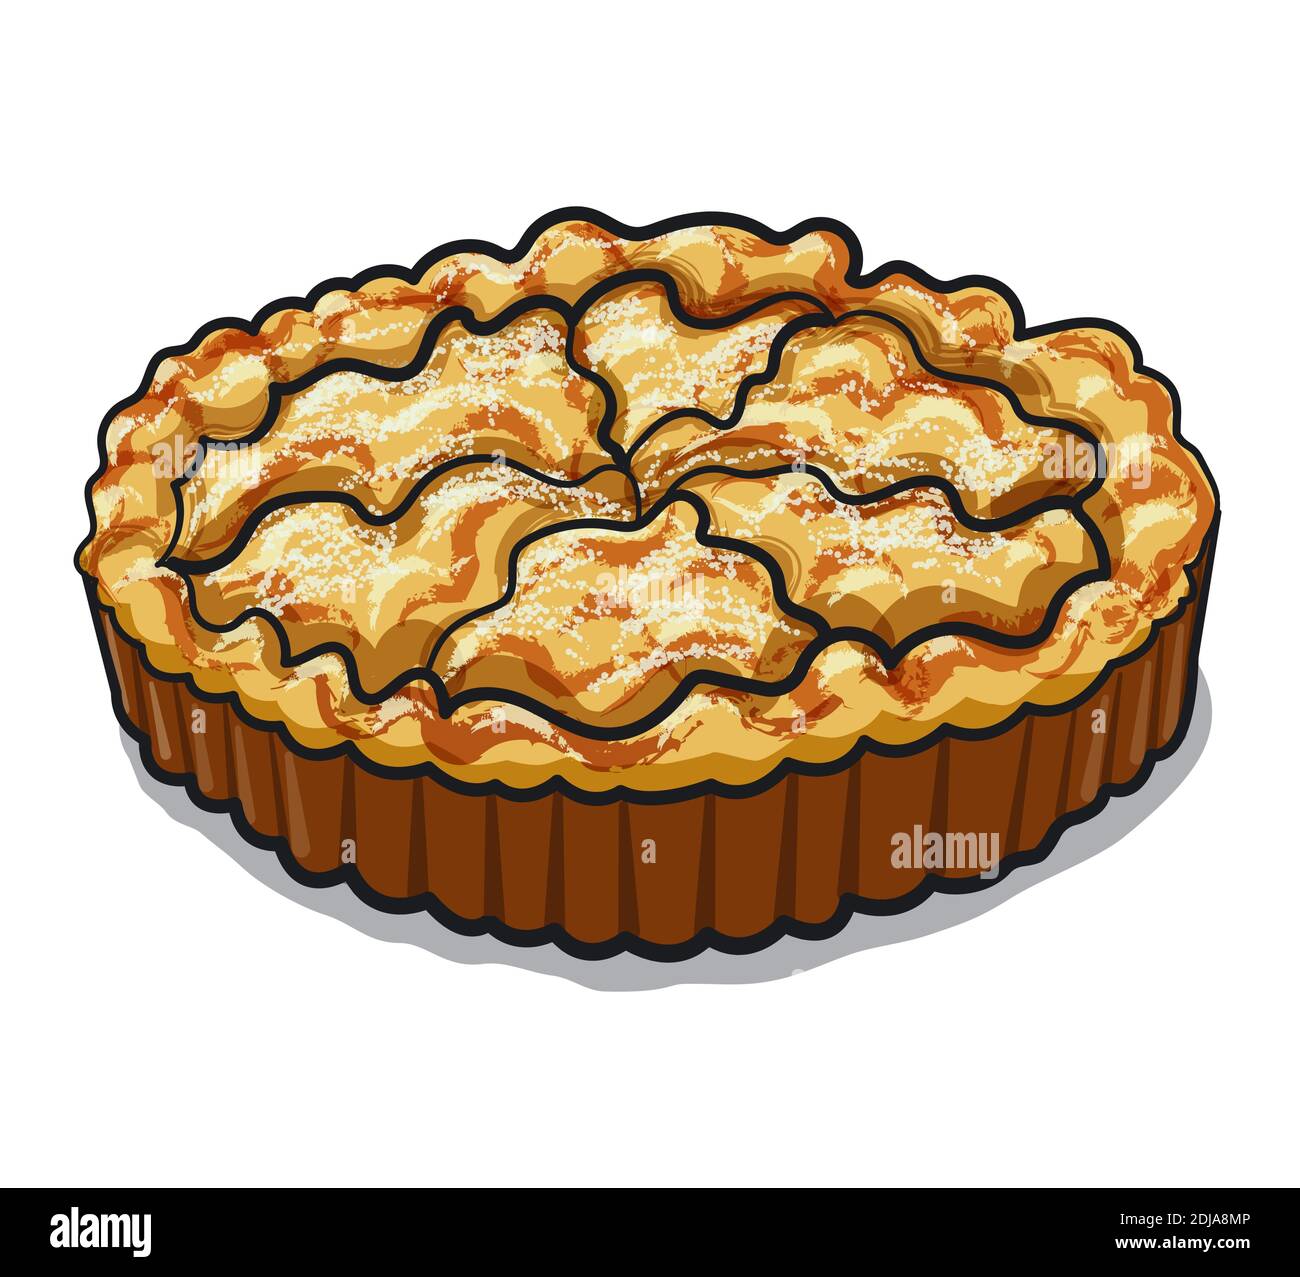 illustration of the traditional baked apple pie on the white background Stock Vector